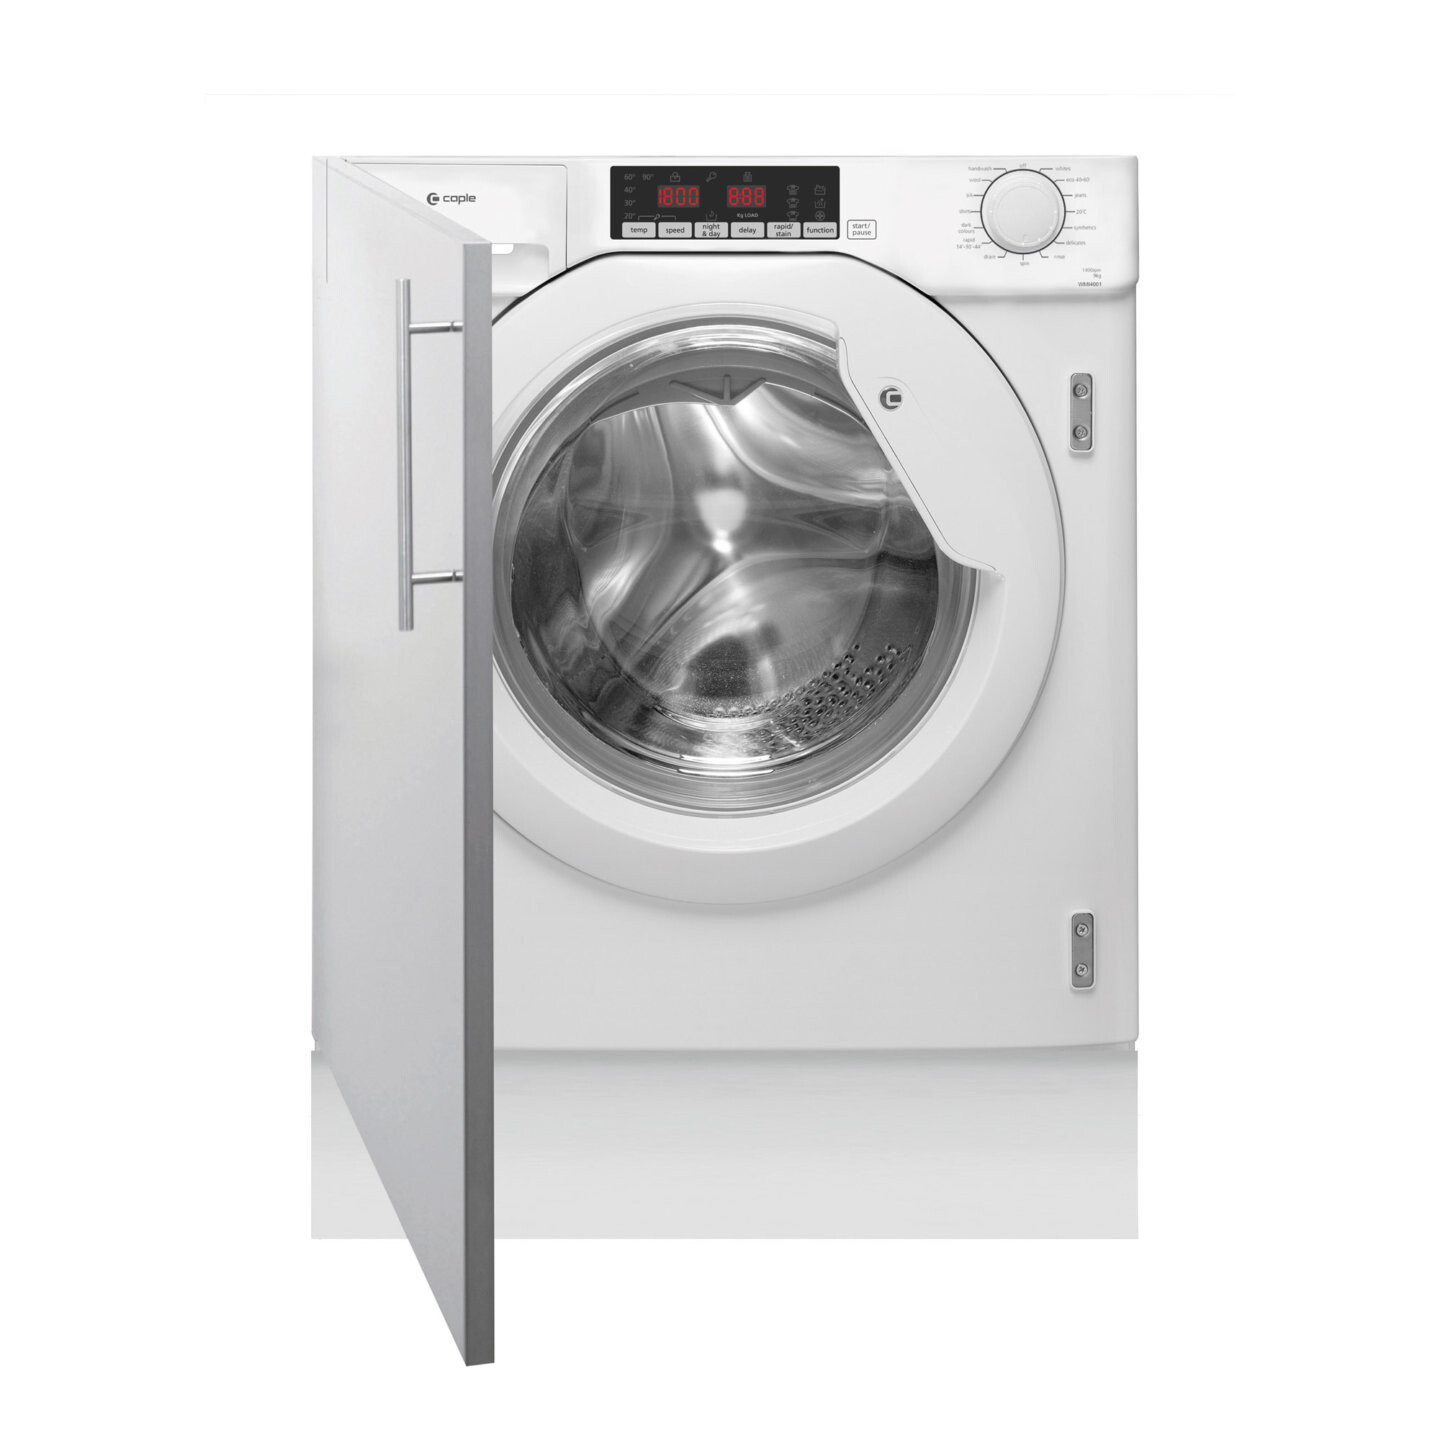 Caple Integrated Washing Machine 9kg WMi4001 1400 RPM A Rated – White